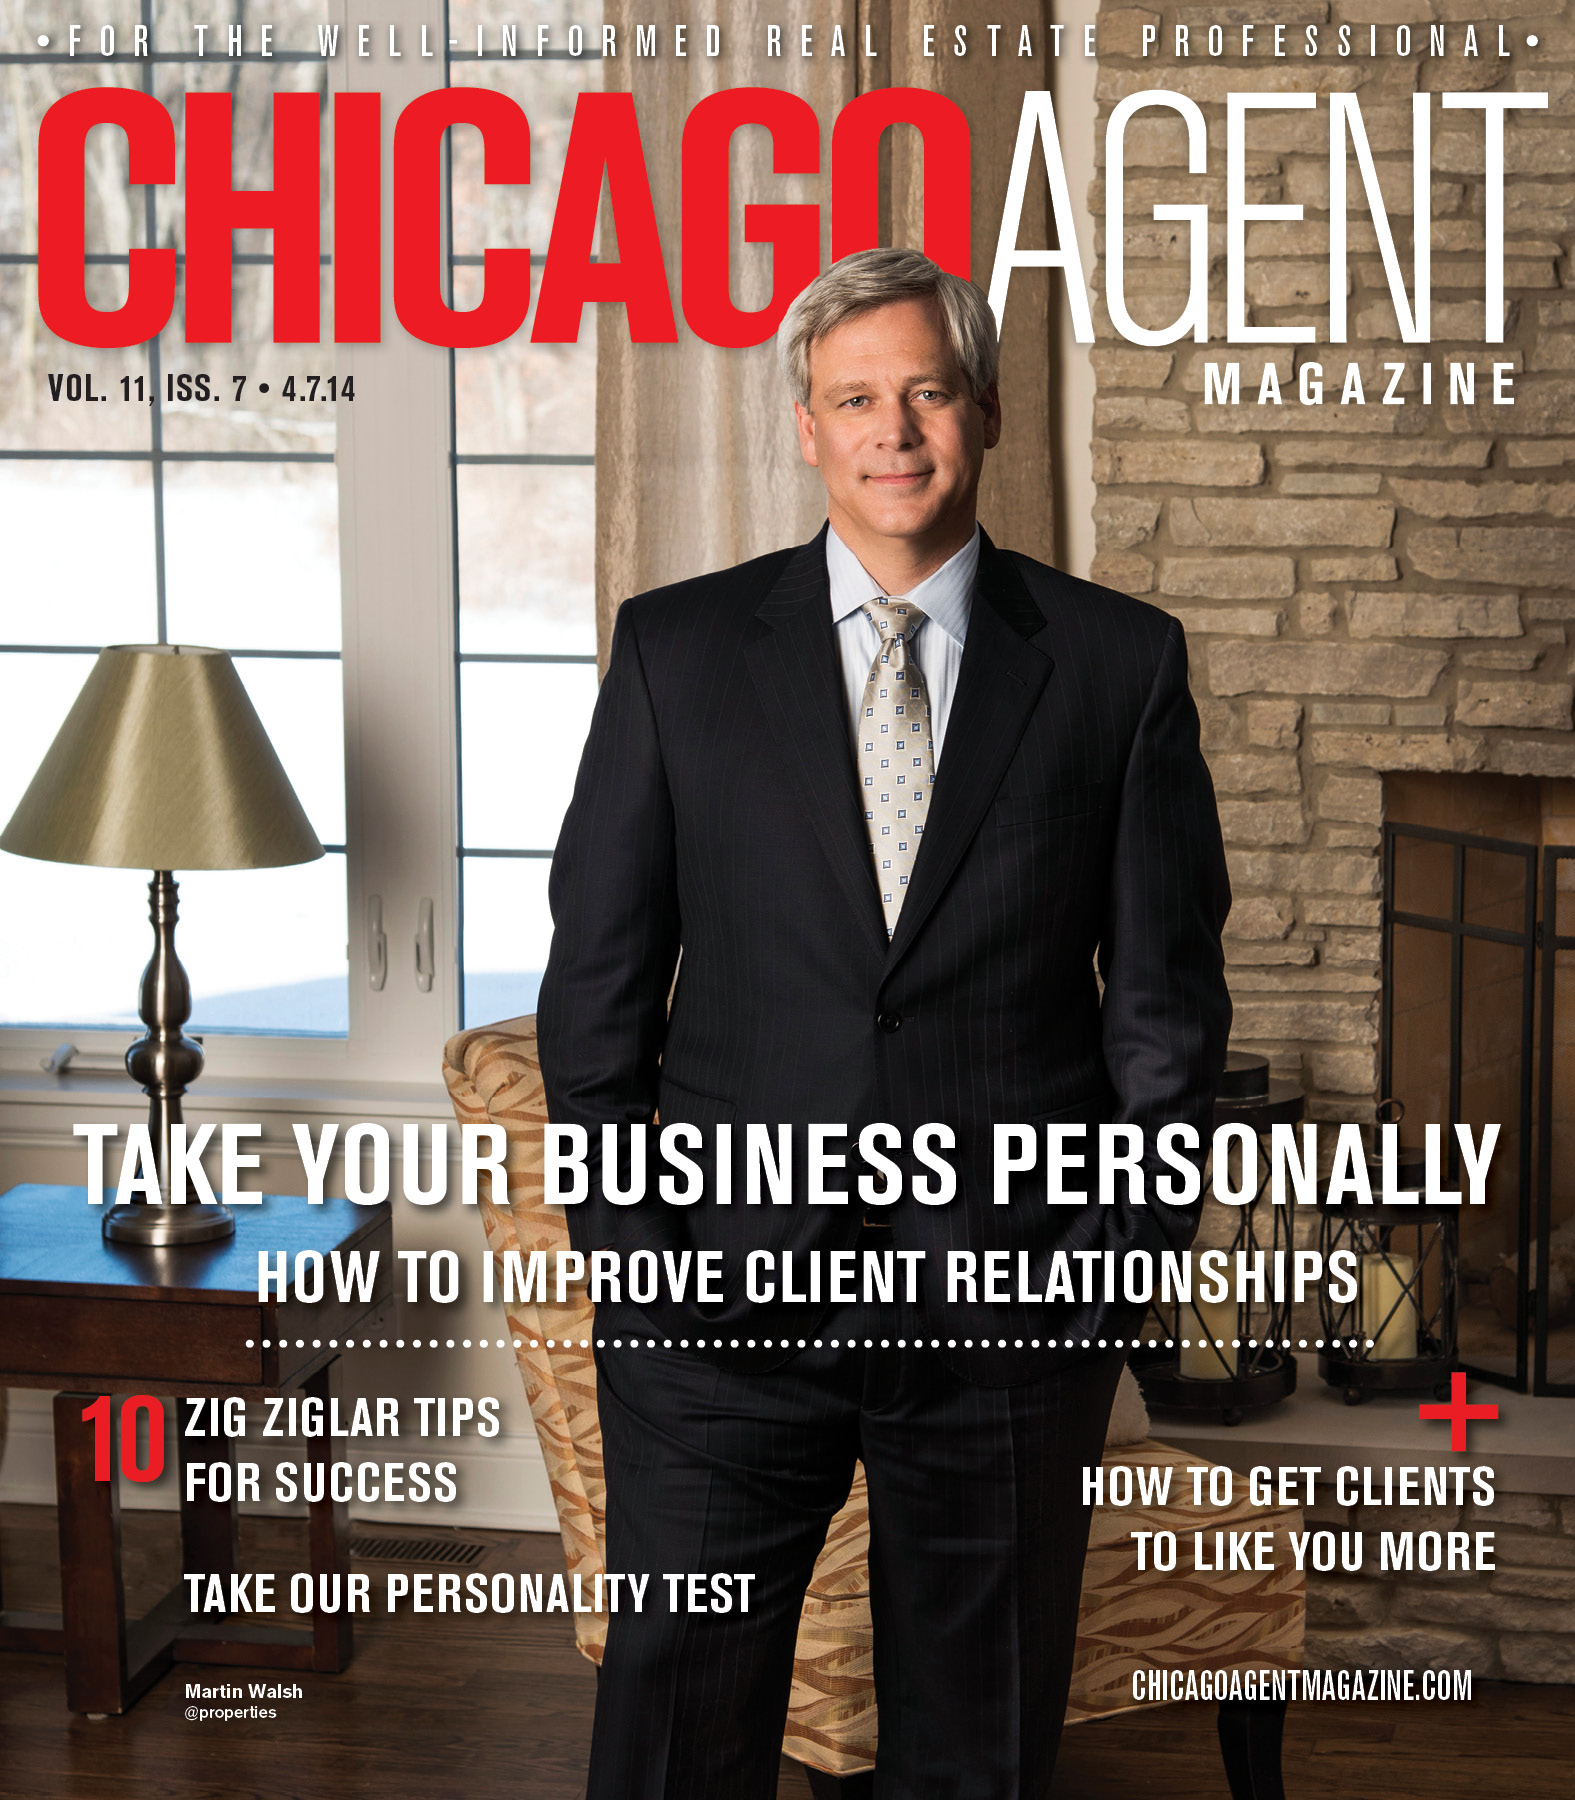 Take Your Business Personally: How to Improve Client Relationships - 4.7.14